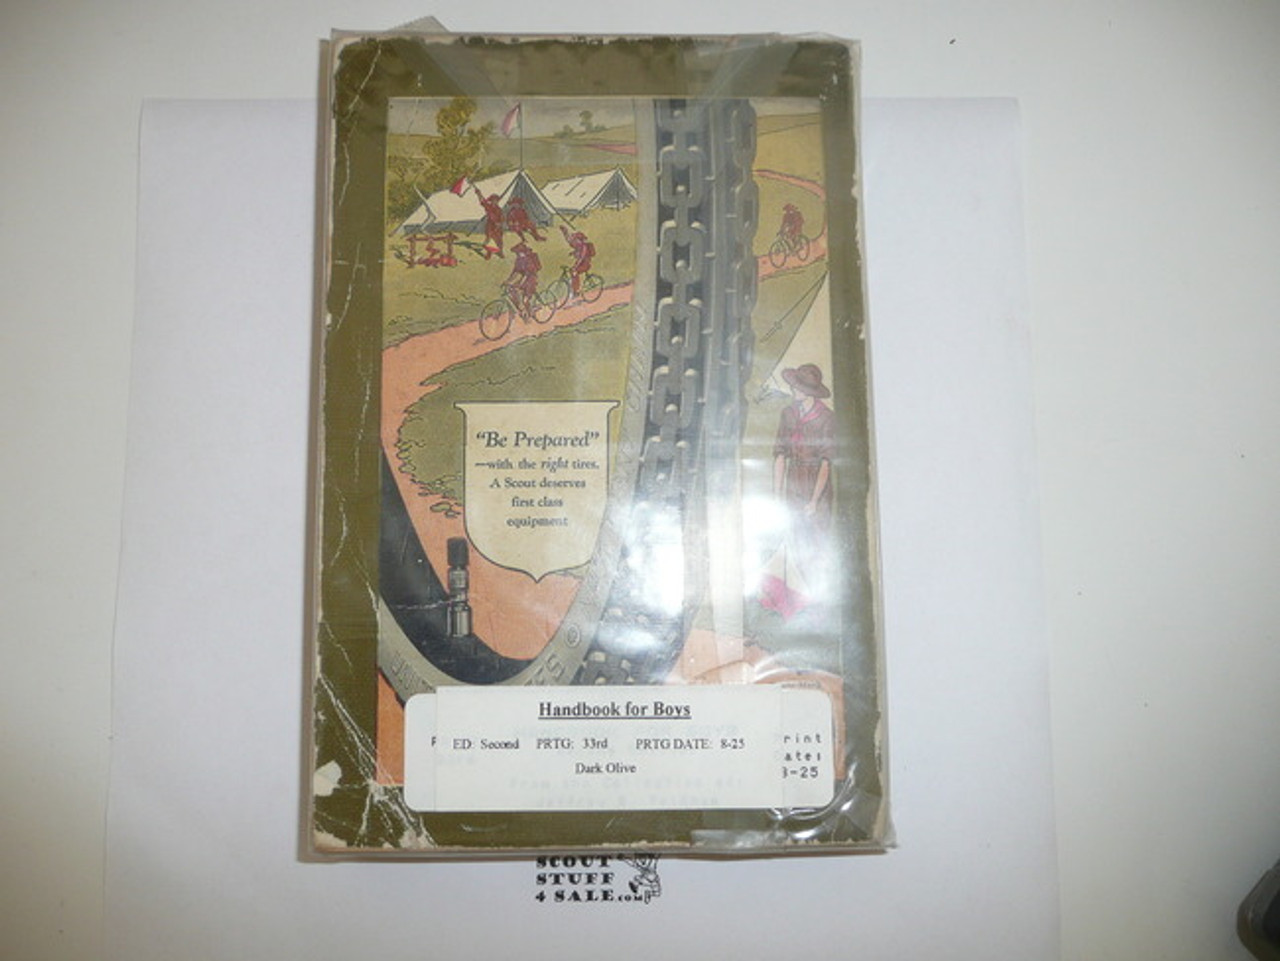 1925 Boy Scout Handbook, Second Edition, Thirty-third Printing, little spine or cover wear